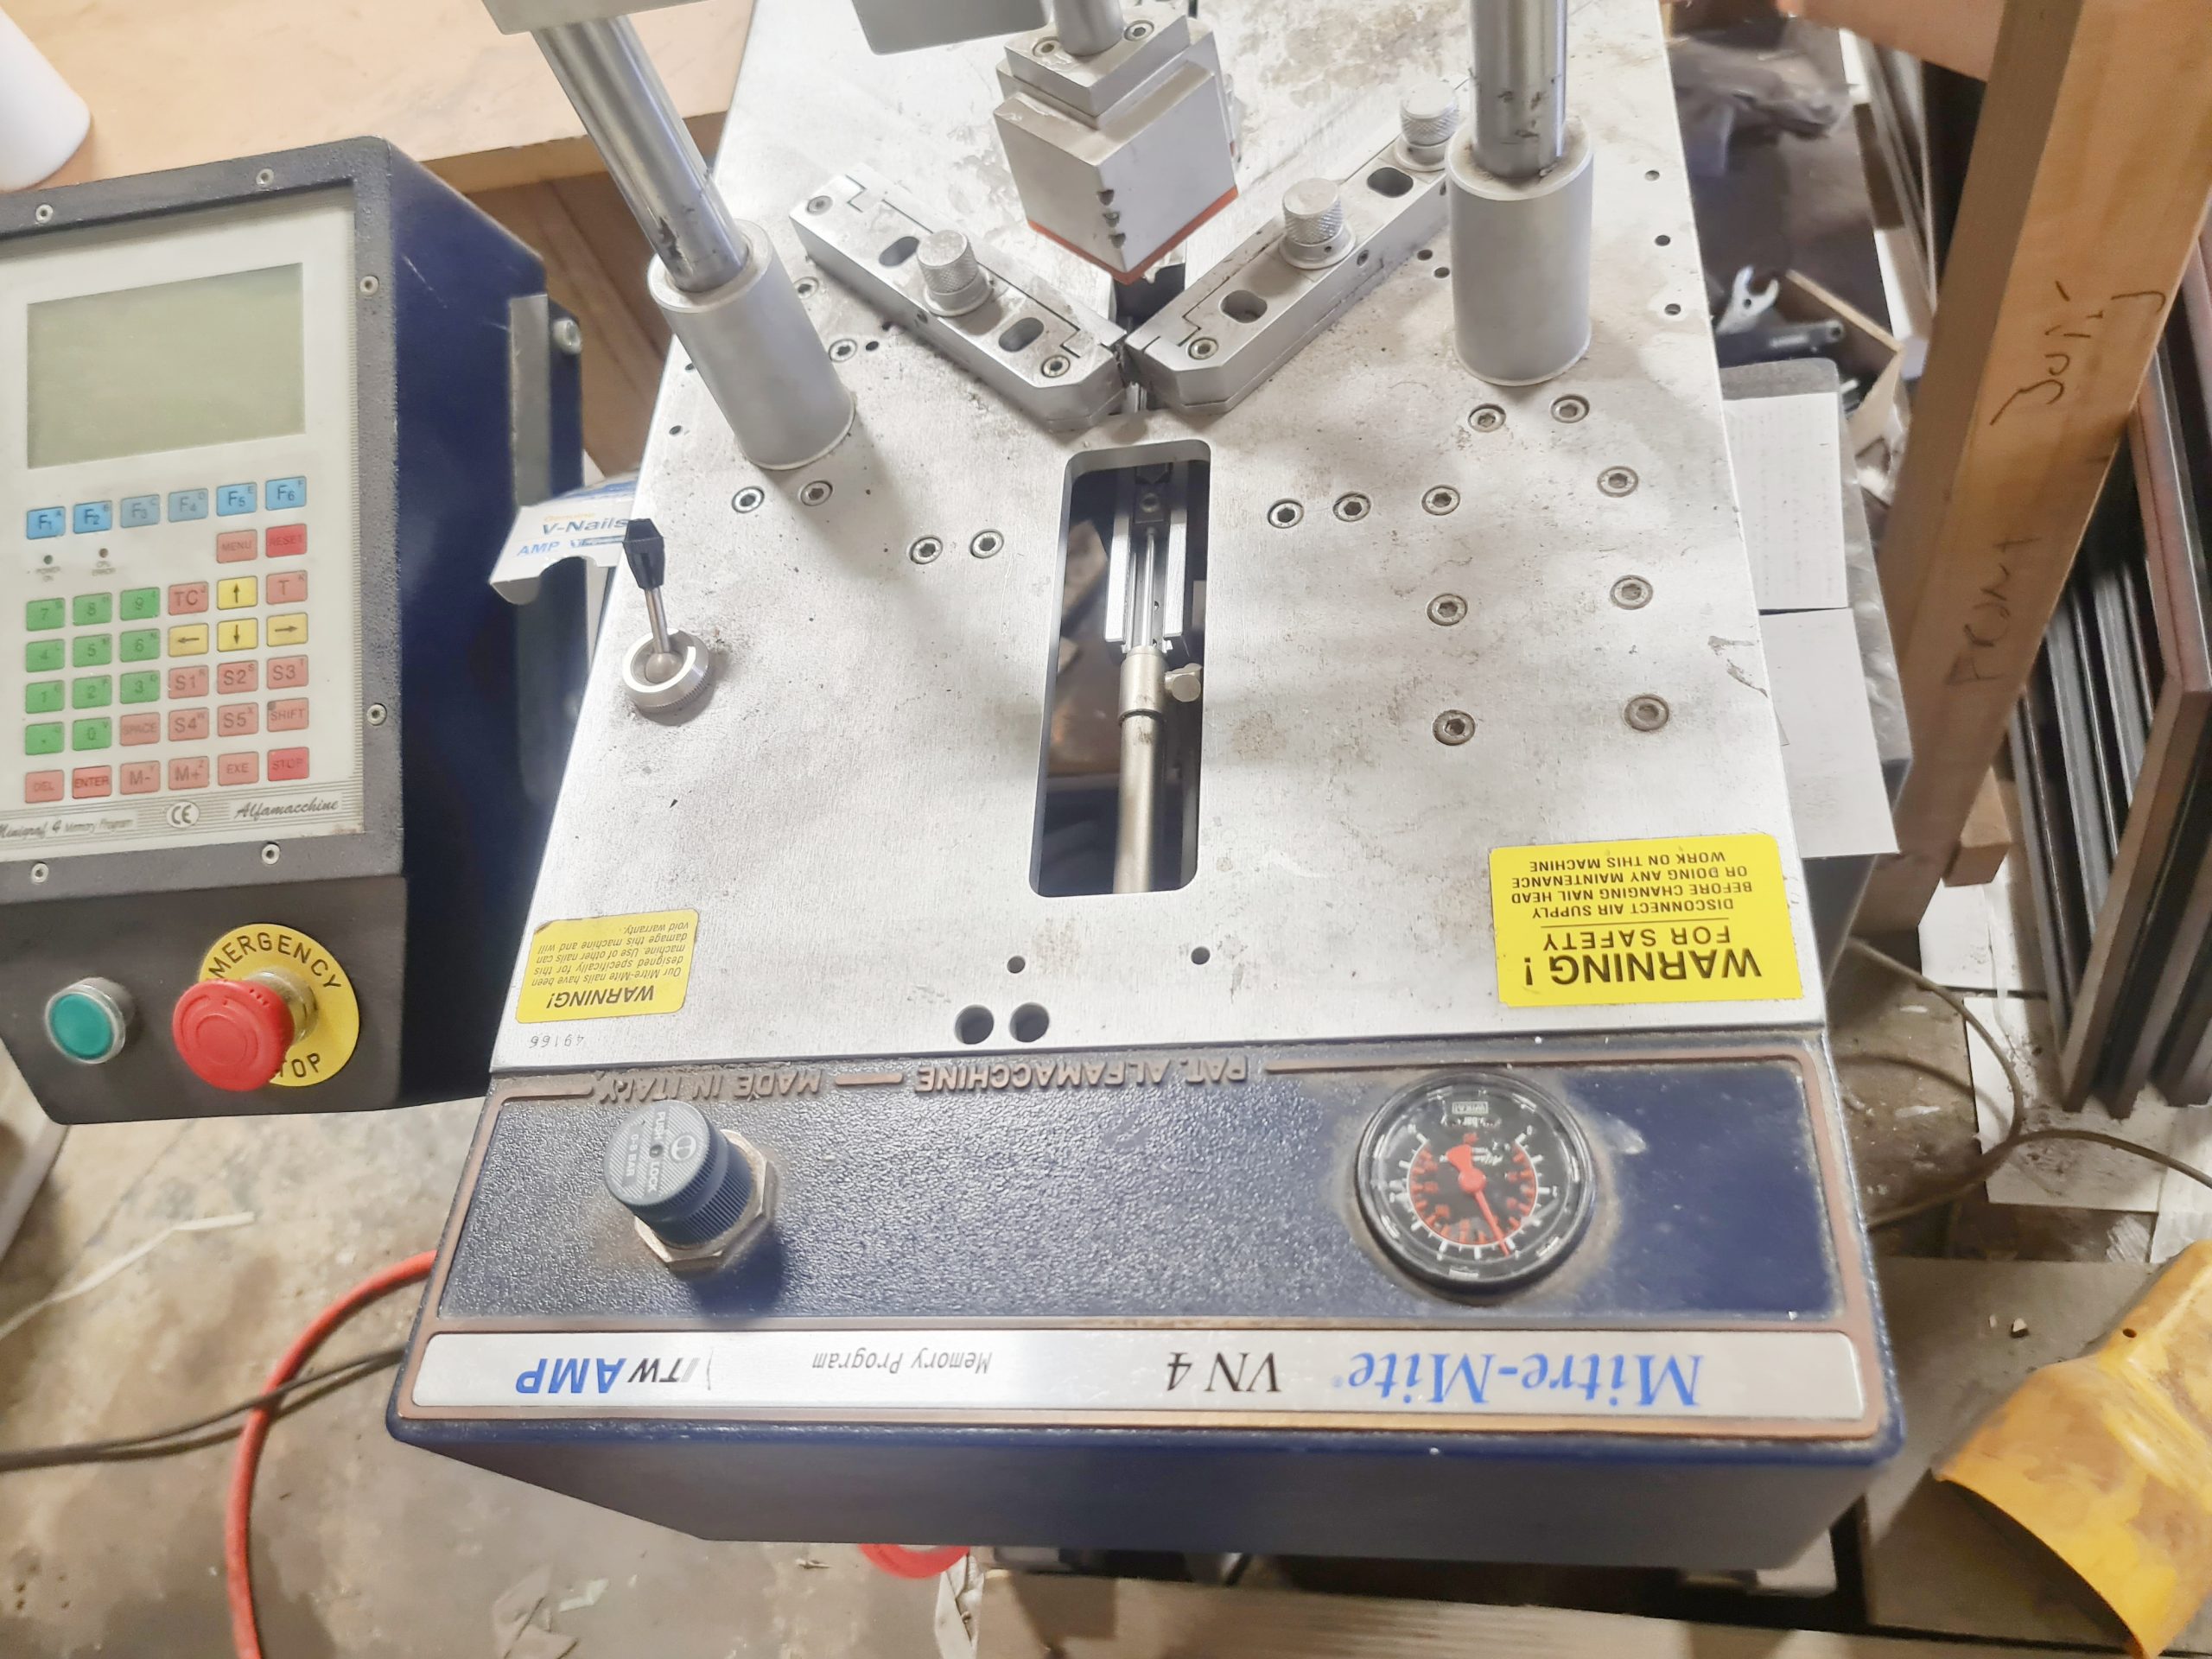 Equipment Lot: ITW AMP Mitre Mite VN4MP / U500 Joiner, Pistorius EMN Double Miter Saw, Eclipse CMC Mat Cutter, Fletcher 3000 Multi Material Cutter, Seal Masterpiece Bienfang 250 Heat Press, & Dust Collection System (Used) Item # UE-031522B (New York)